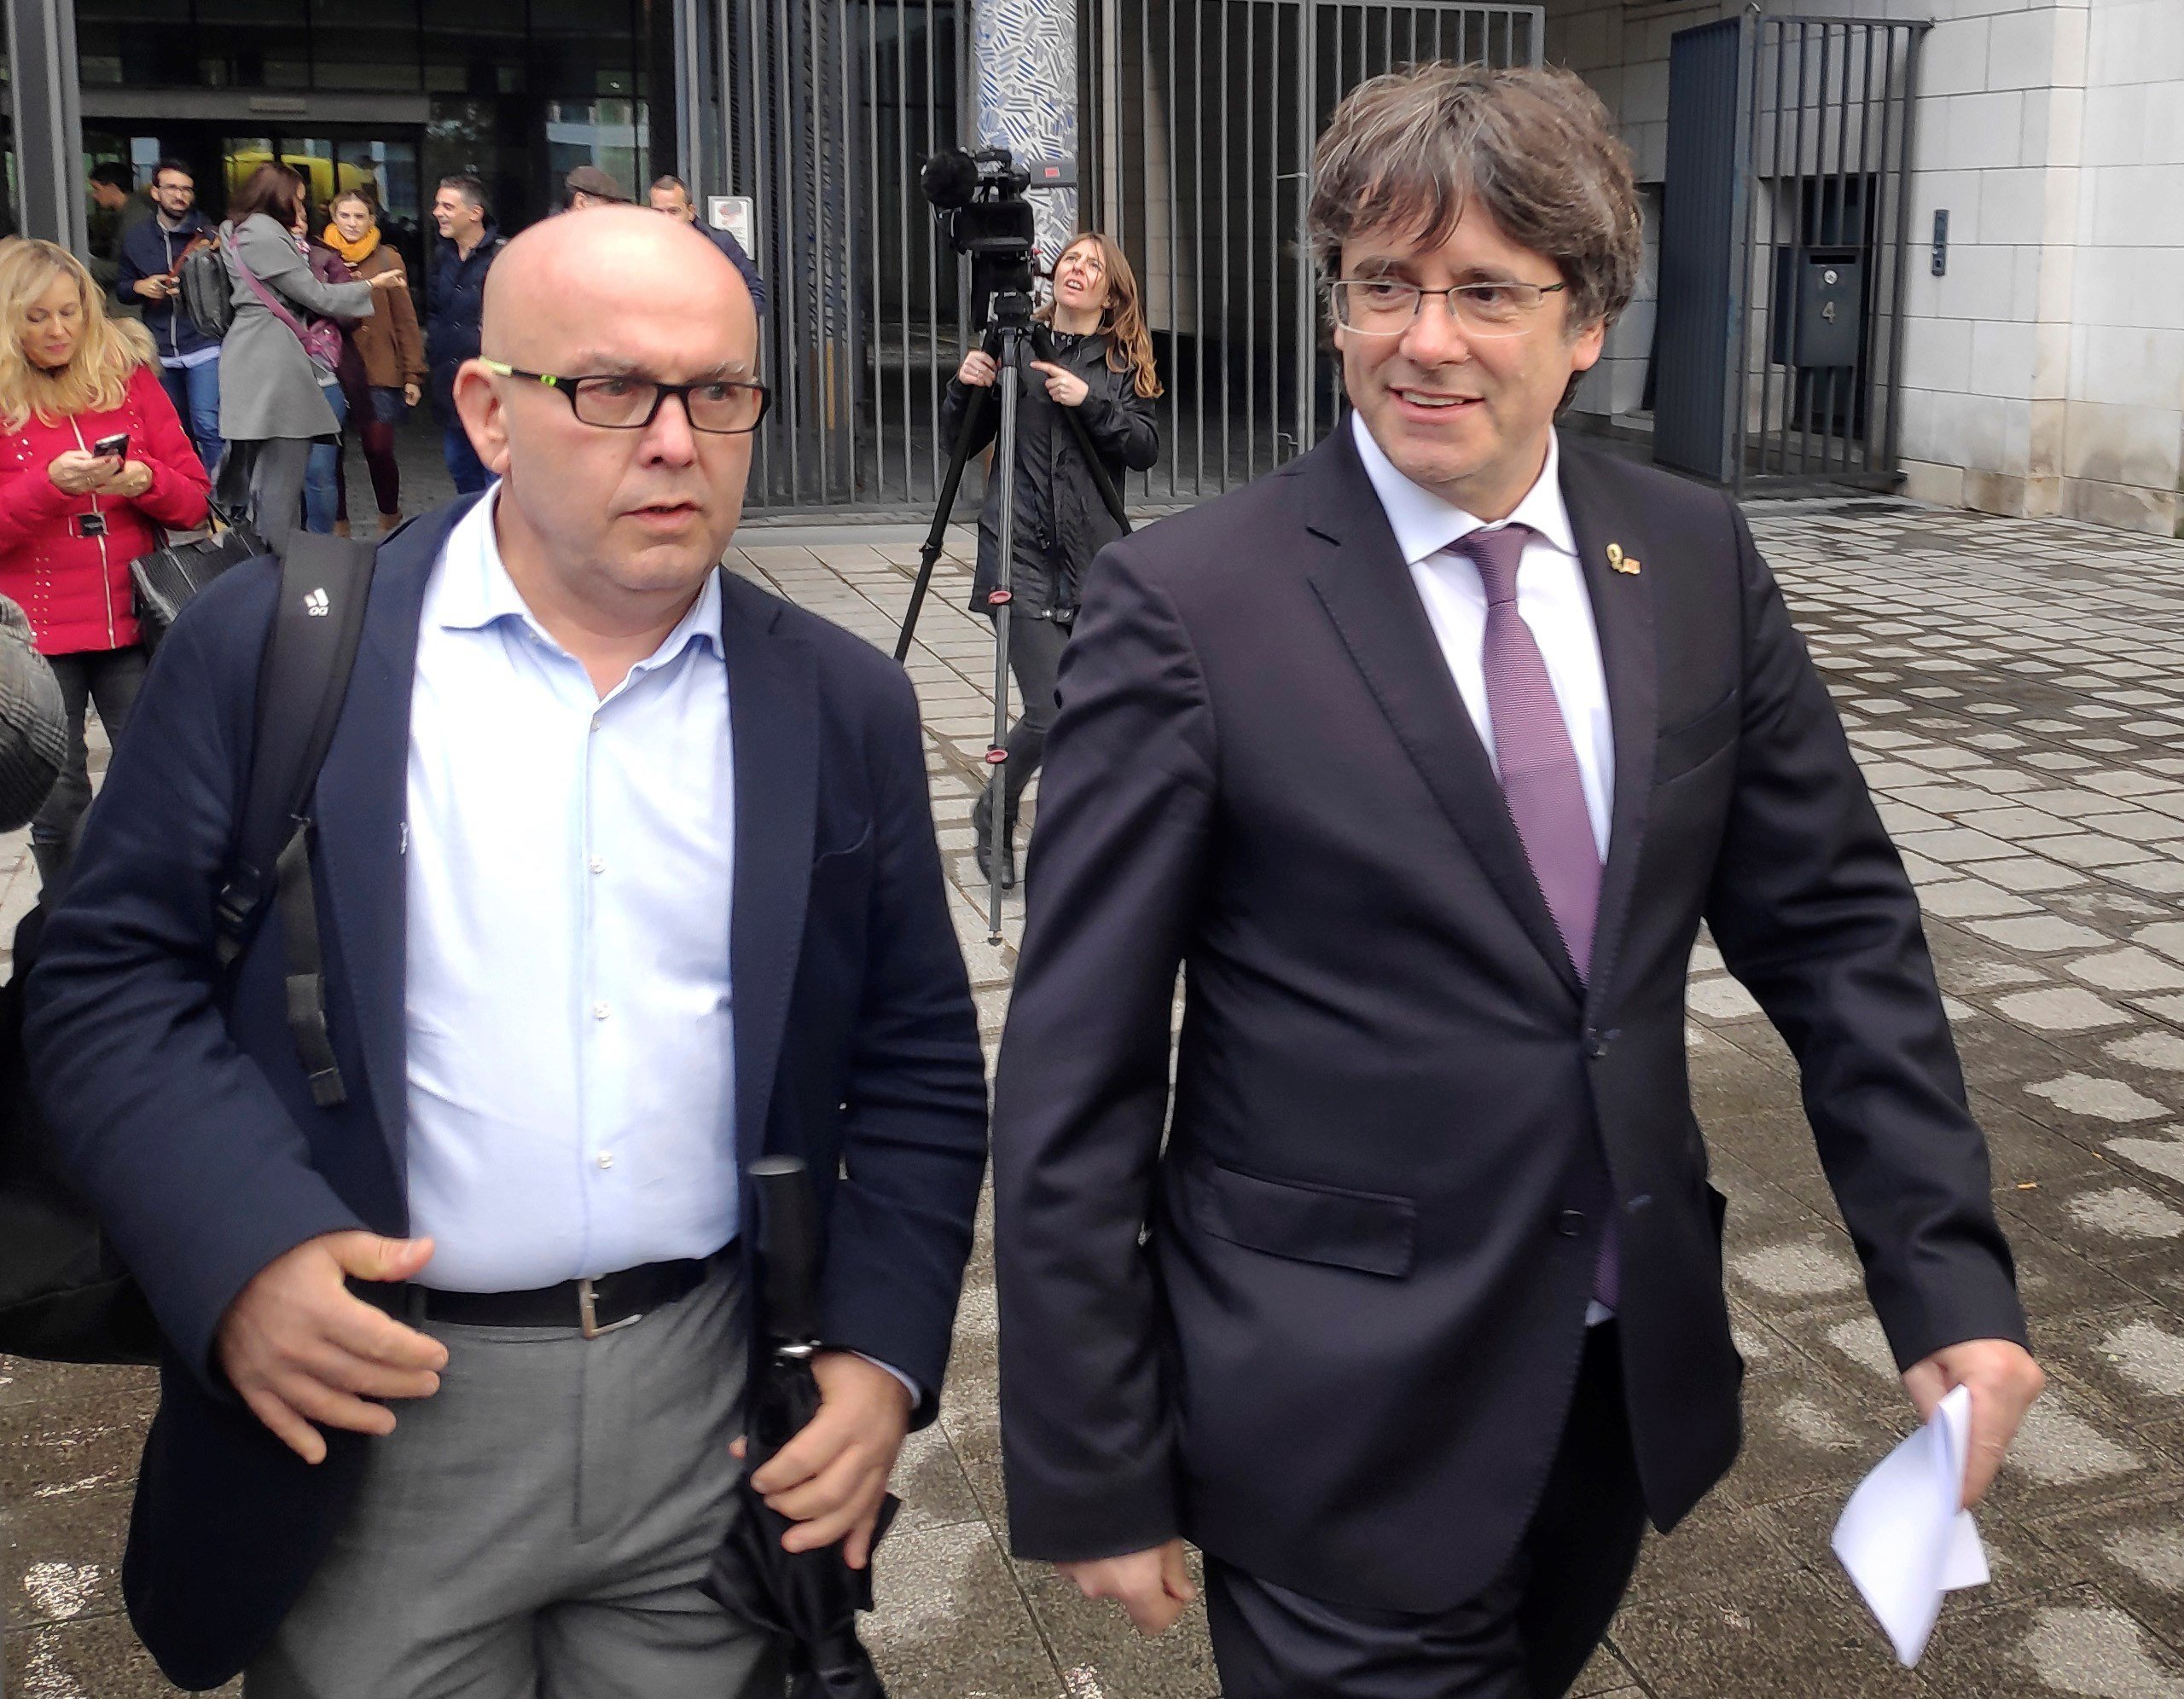 Puigdemont's appeal accuses Court of Accounts of "arbitrary, illegal" decision